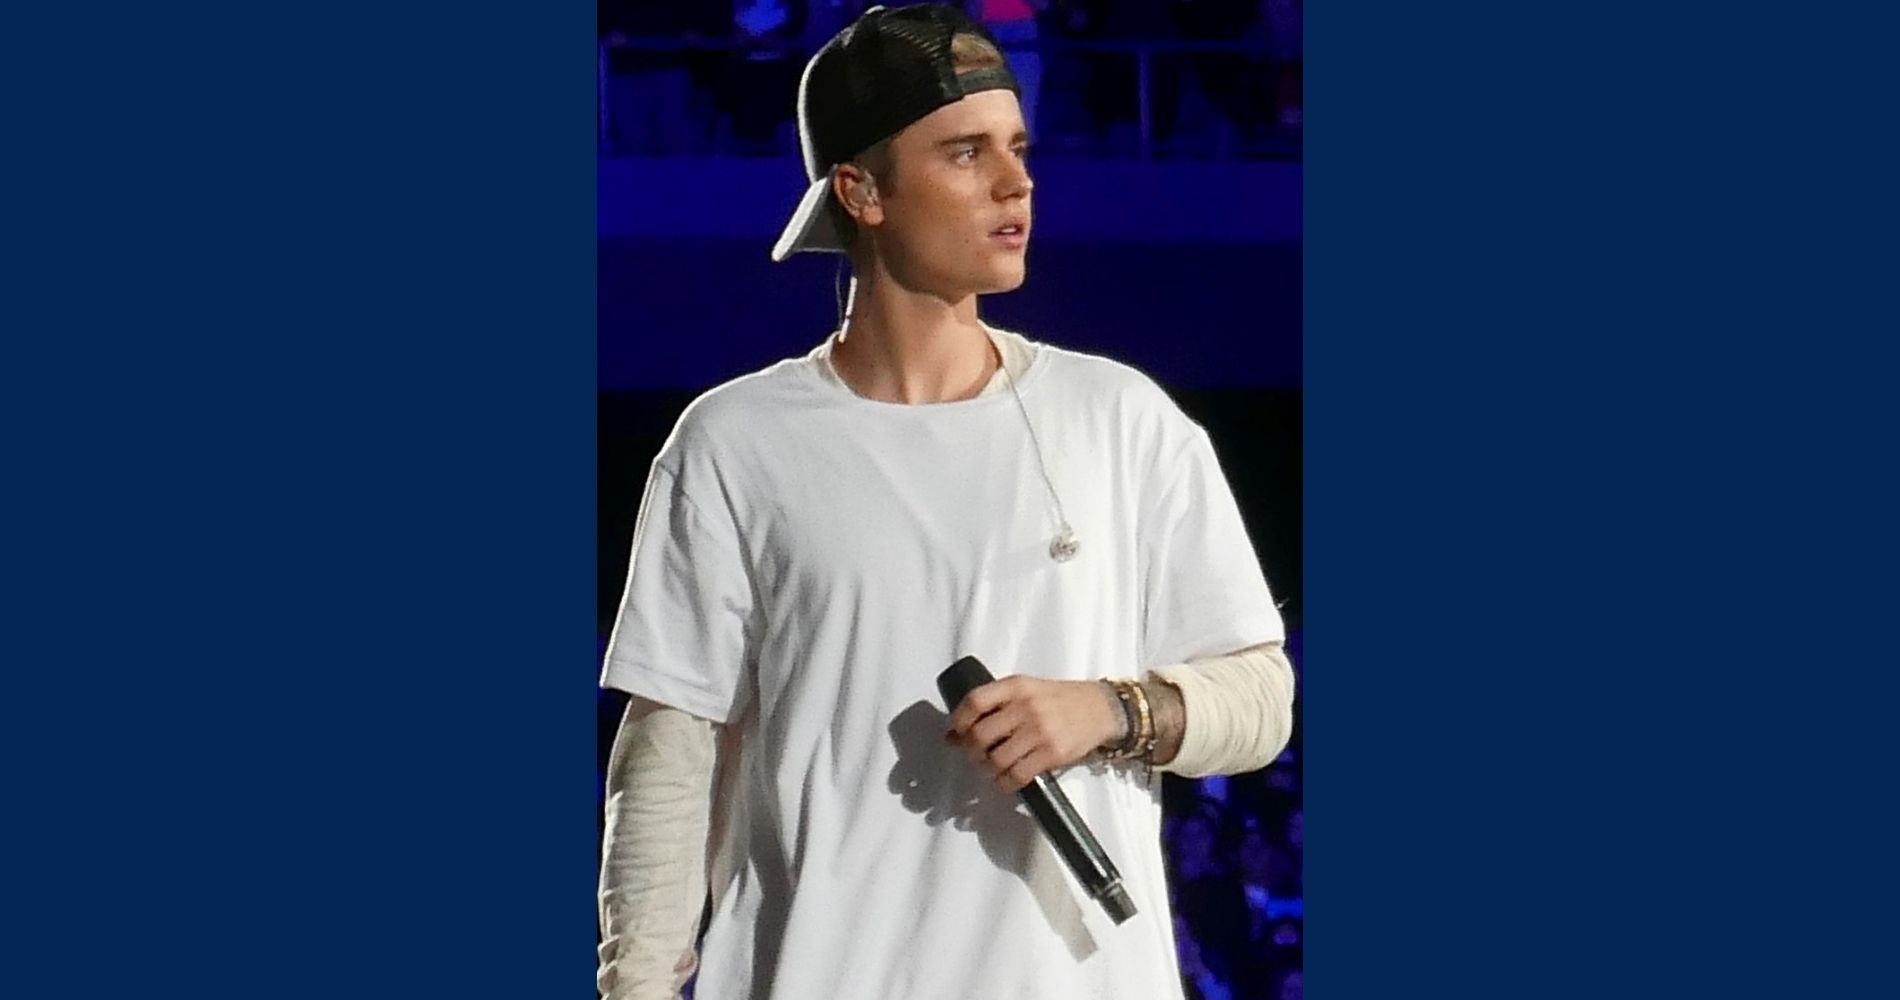 Justin Bieber is all set for his world tour in India after 5 years